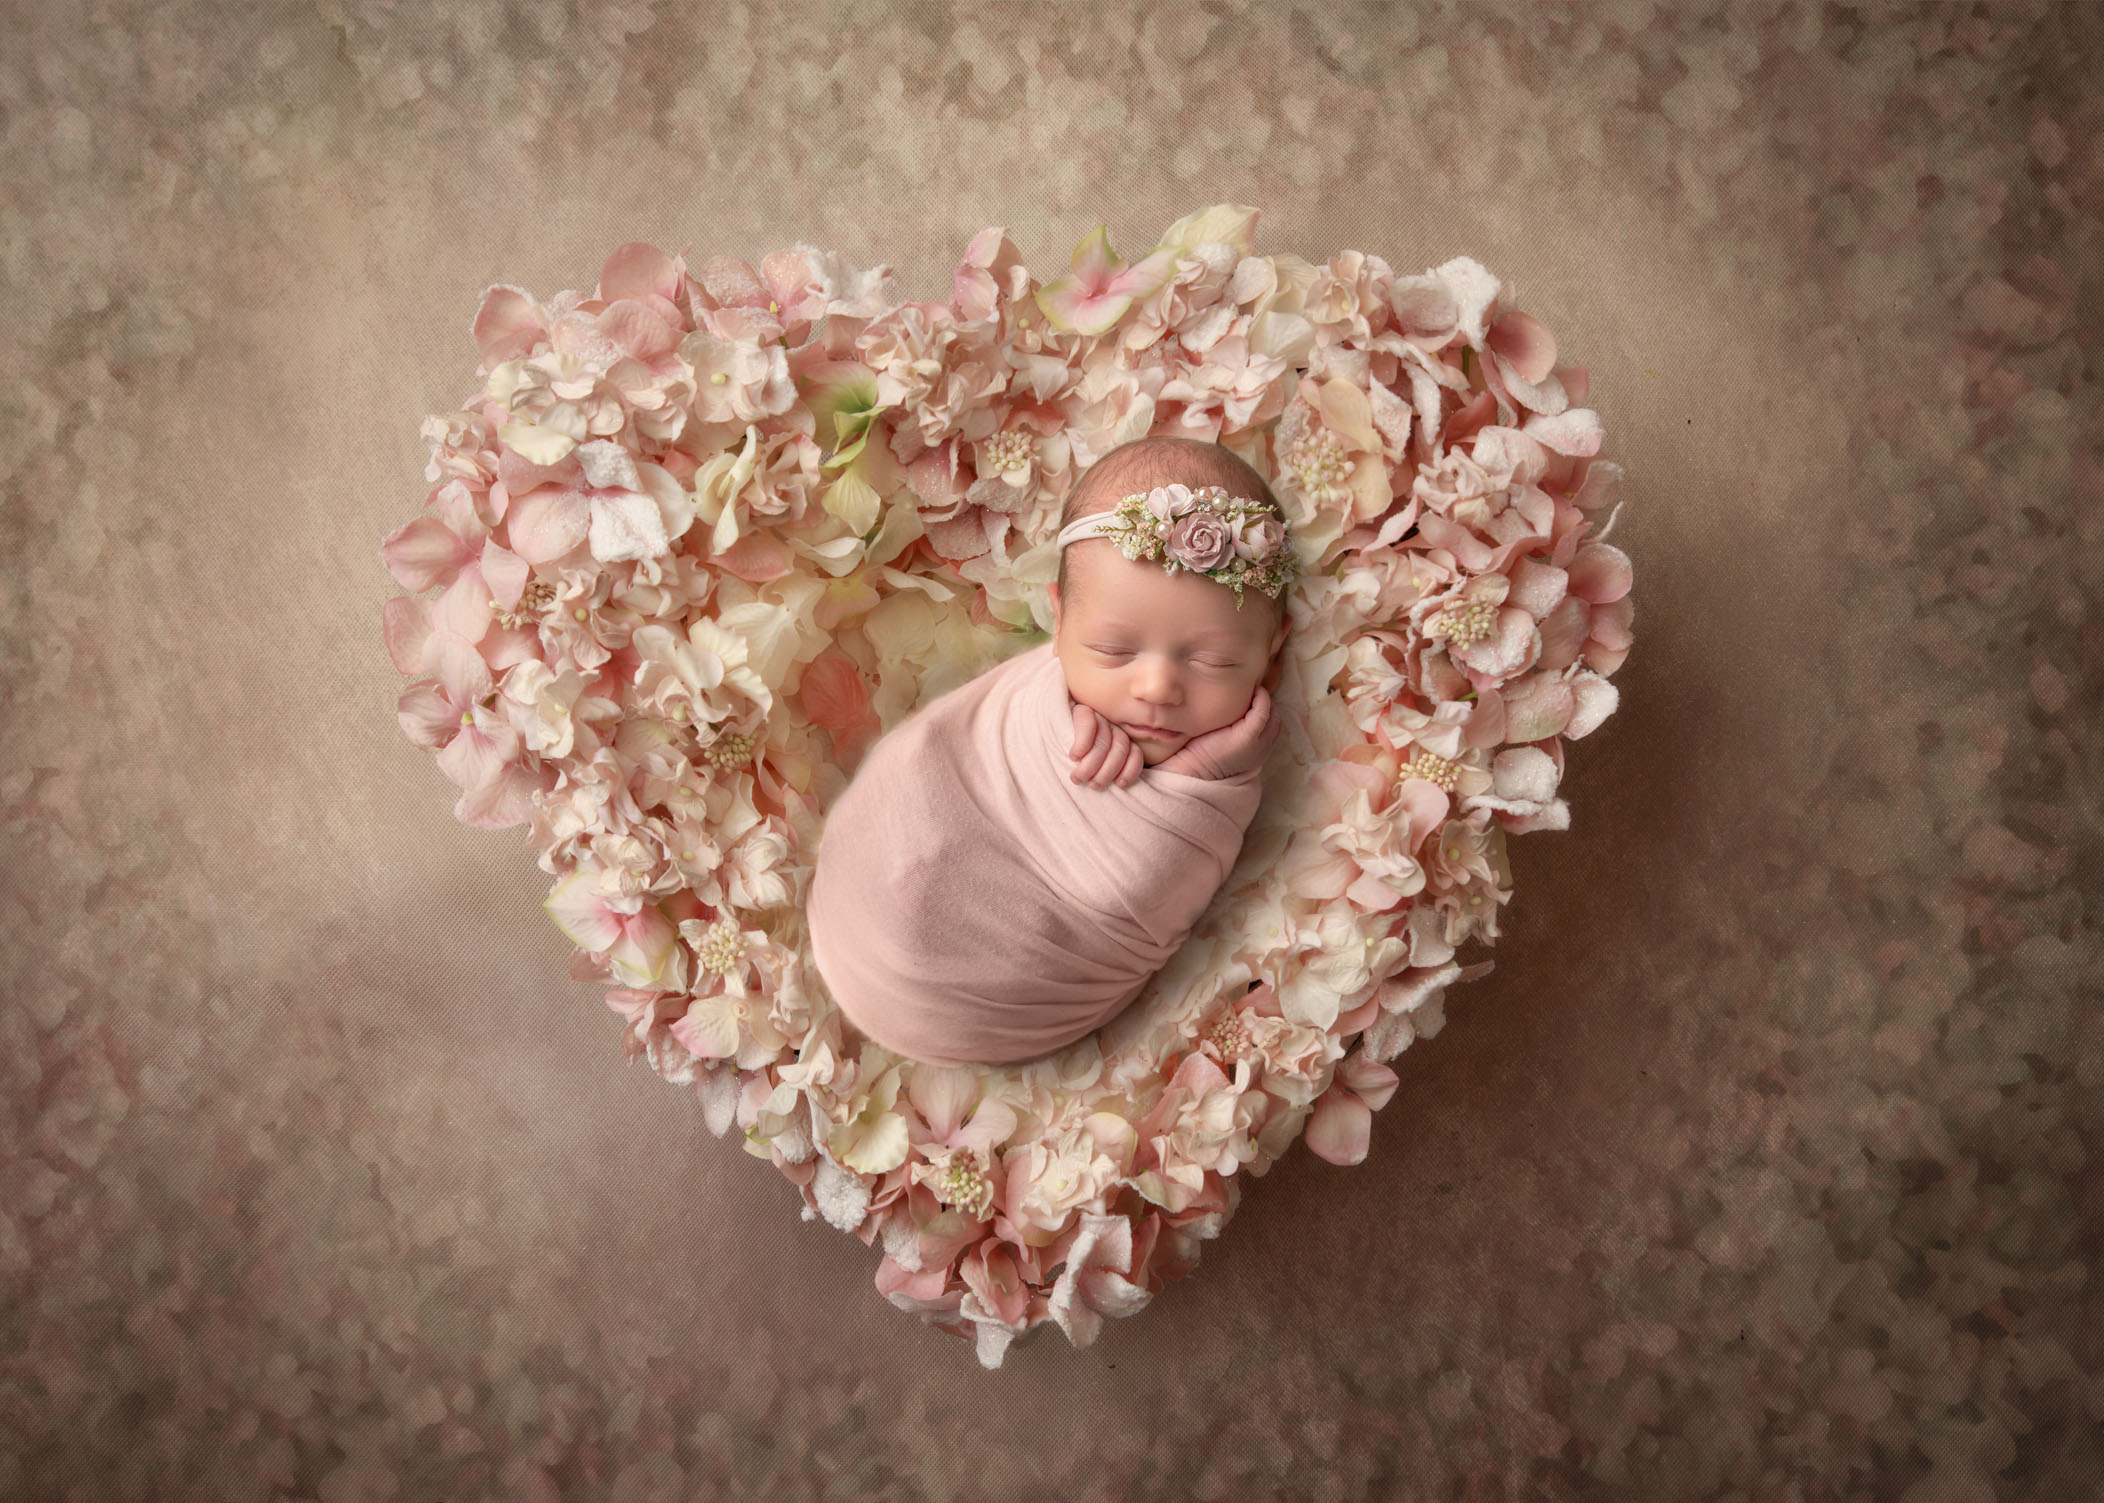 swaddled newborn girl sleeping in a heart shaped basket covered in rose petals